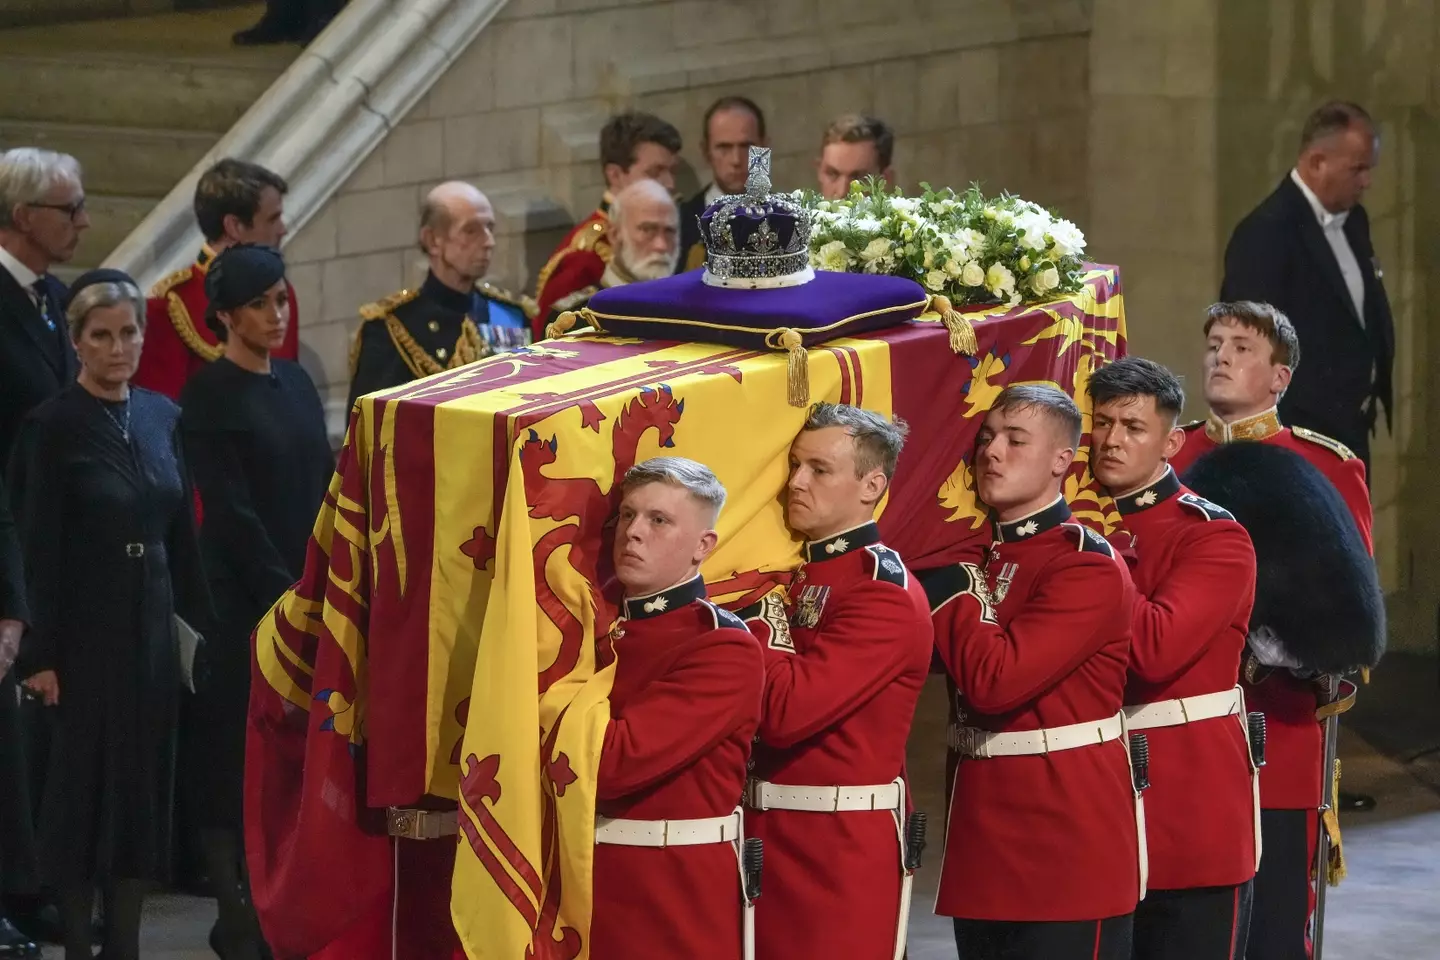 Soldiers carried the Queen's coffin into Westminster Hall.